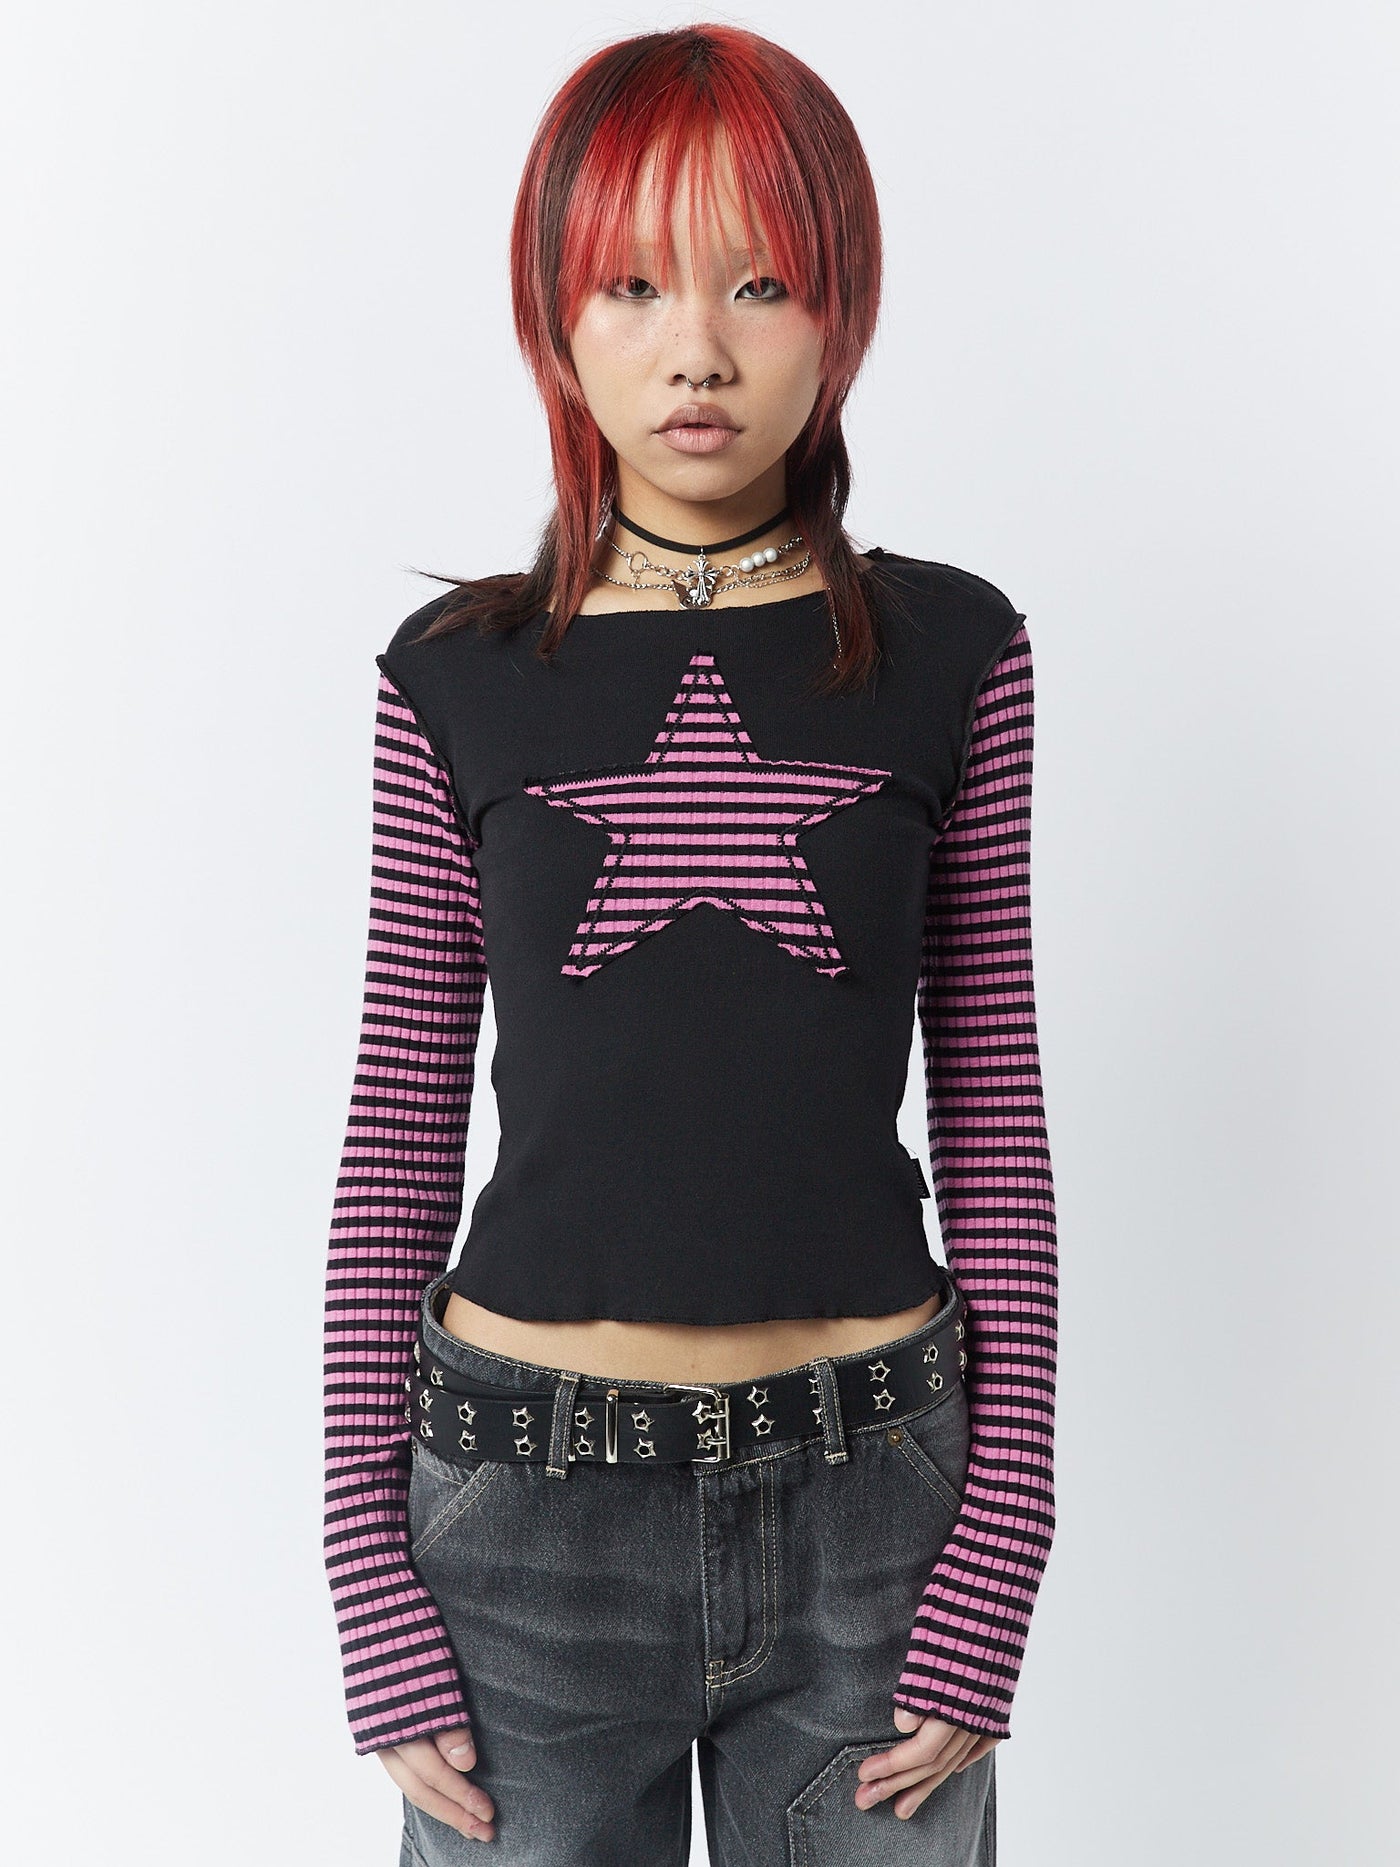 Lost Star Pink Black Striped Long Sleeve Top